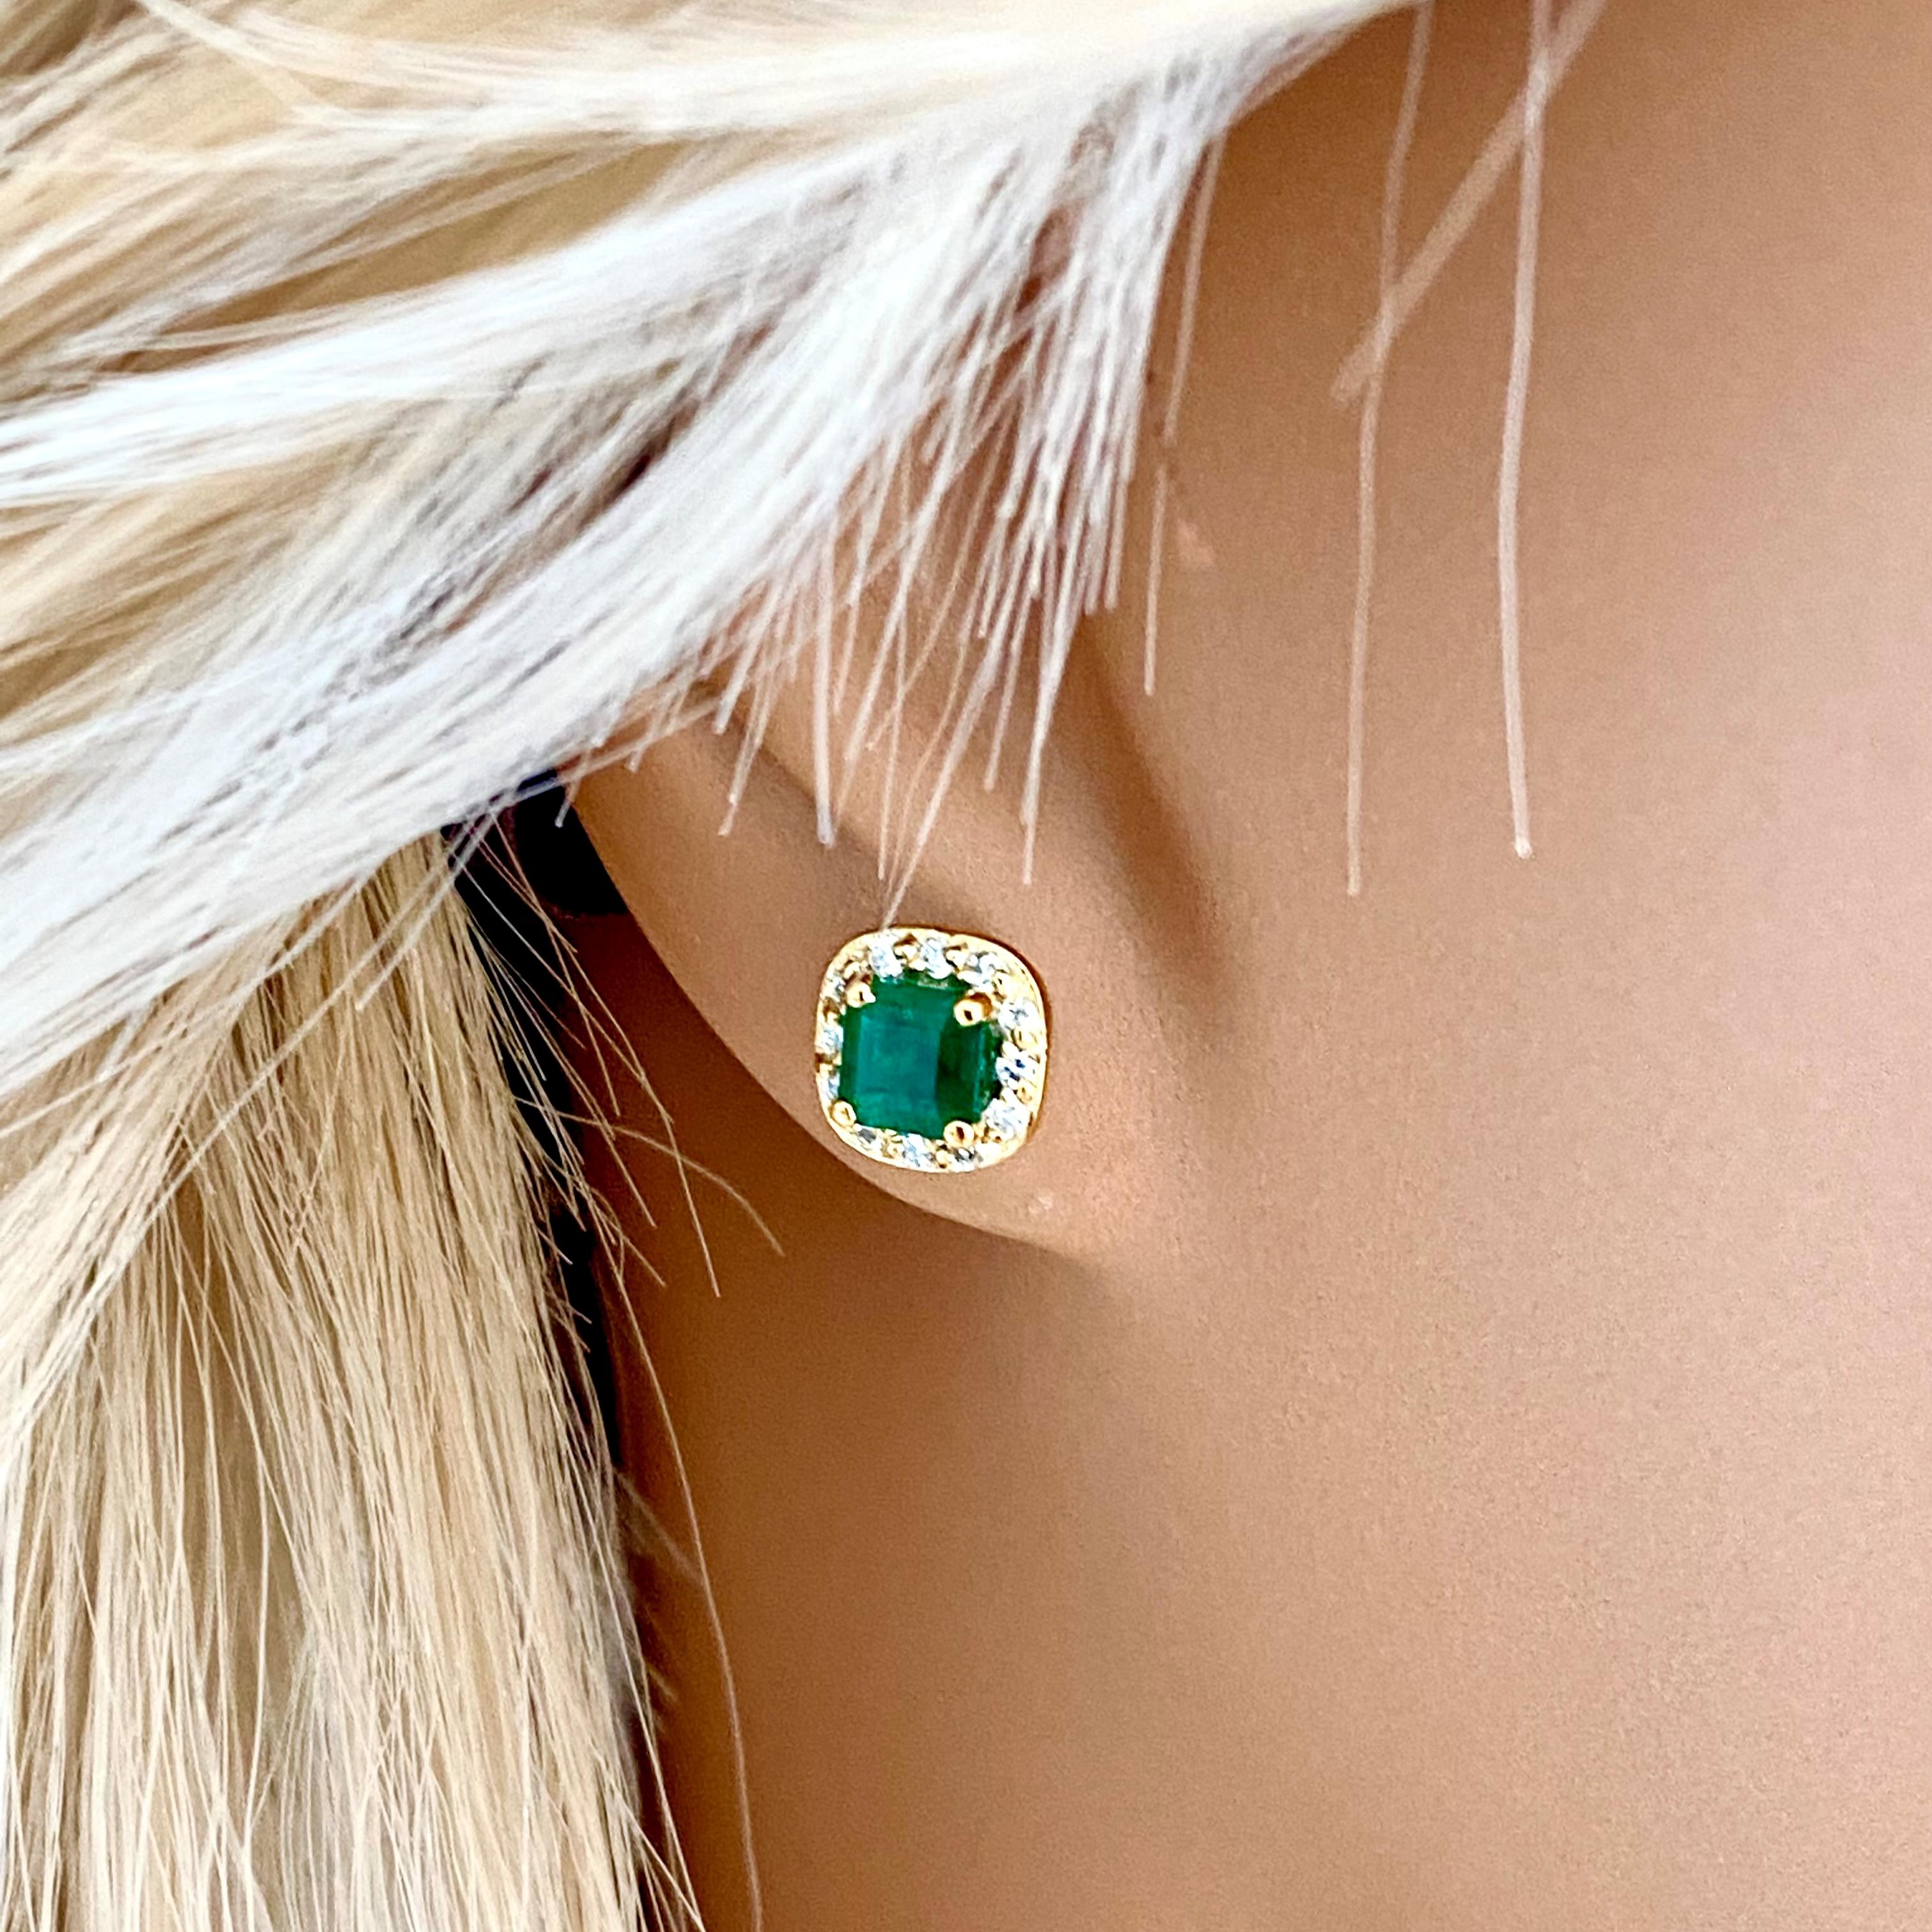 Emerald Shaped Emerald Diamond 1.20 Carat Halo Yellow Gold 0.35 Inch Earrings For Sale 2